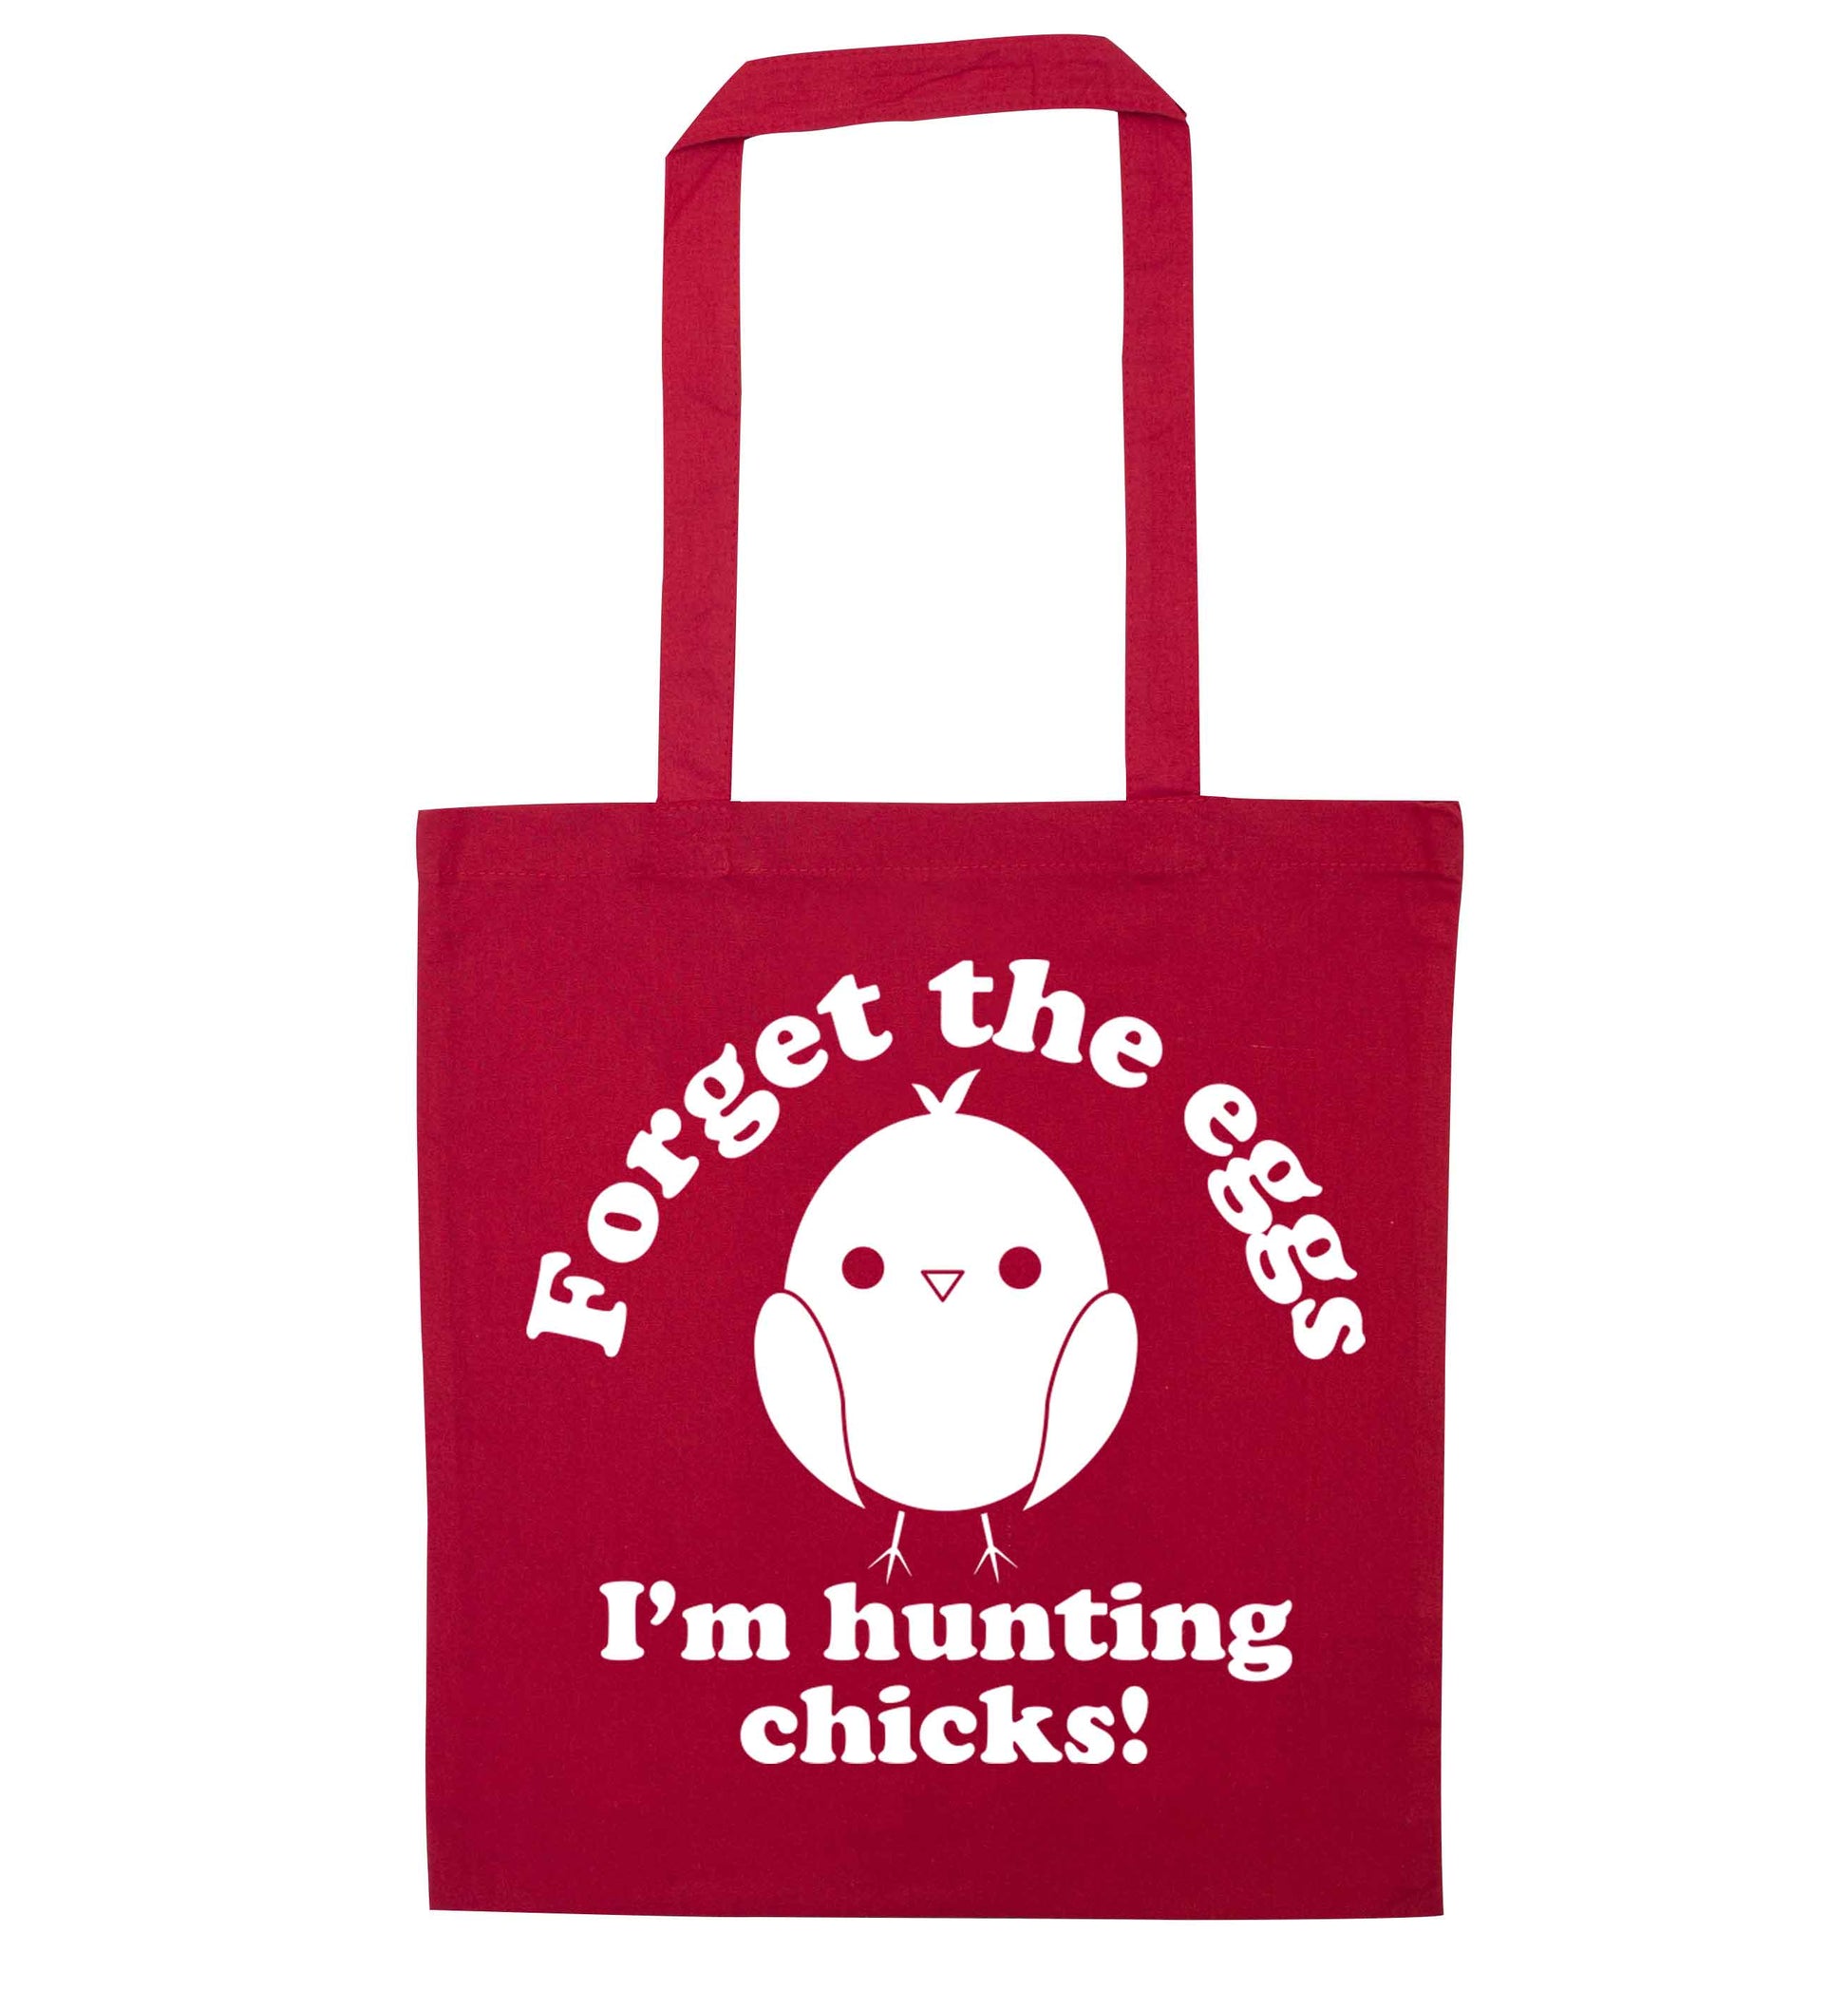 Forget the eggs I'm hunting chicks! red tote bag